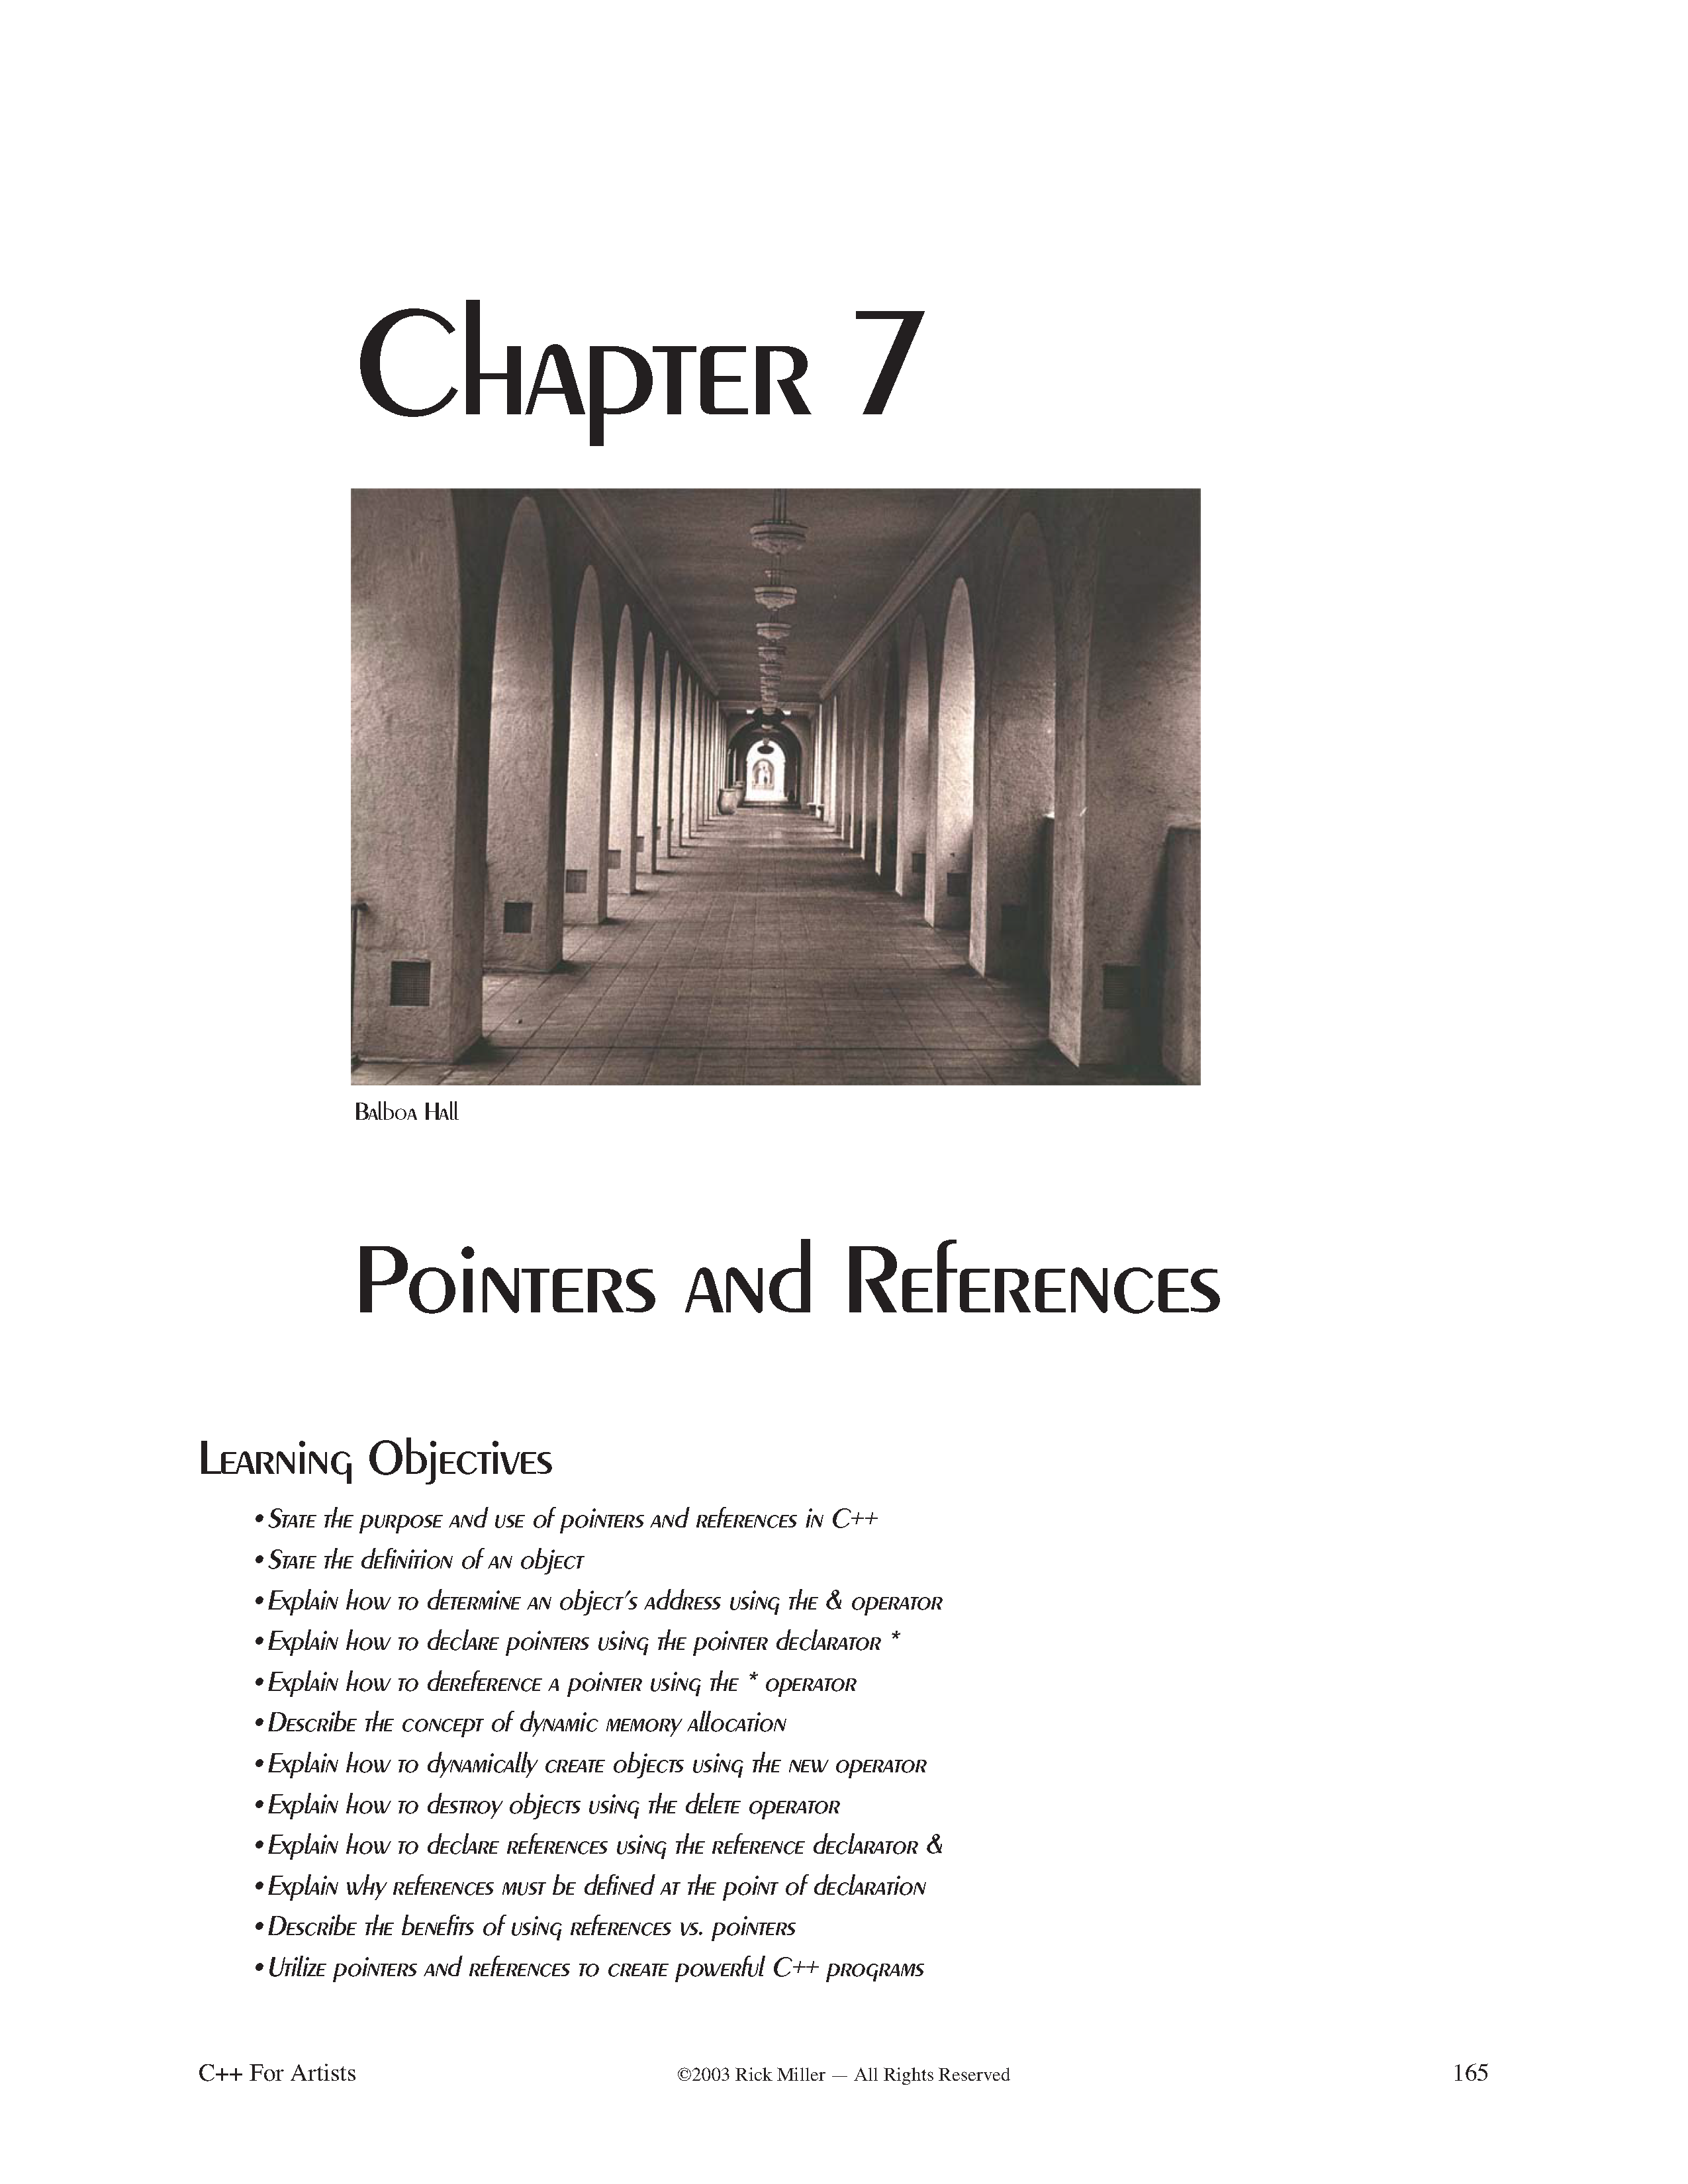 C++ For Artists 1st ED Chapter 7